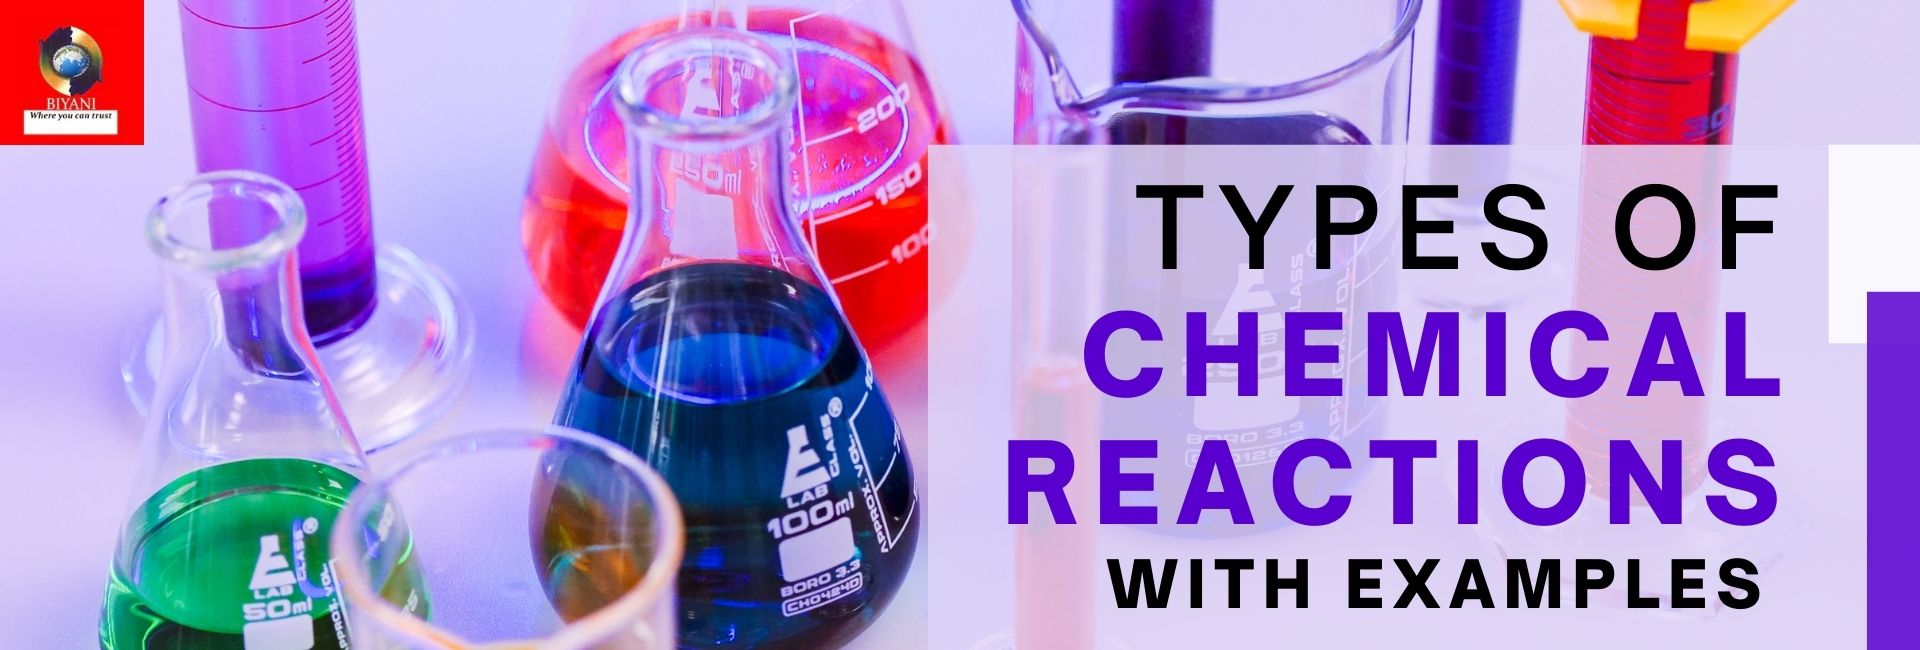 types of chemcial reactions with examples